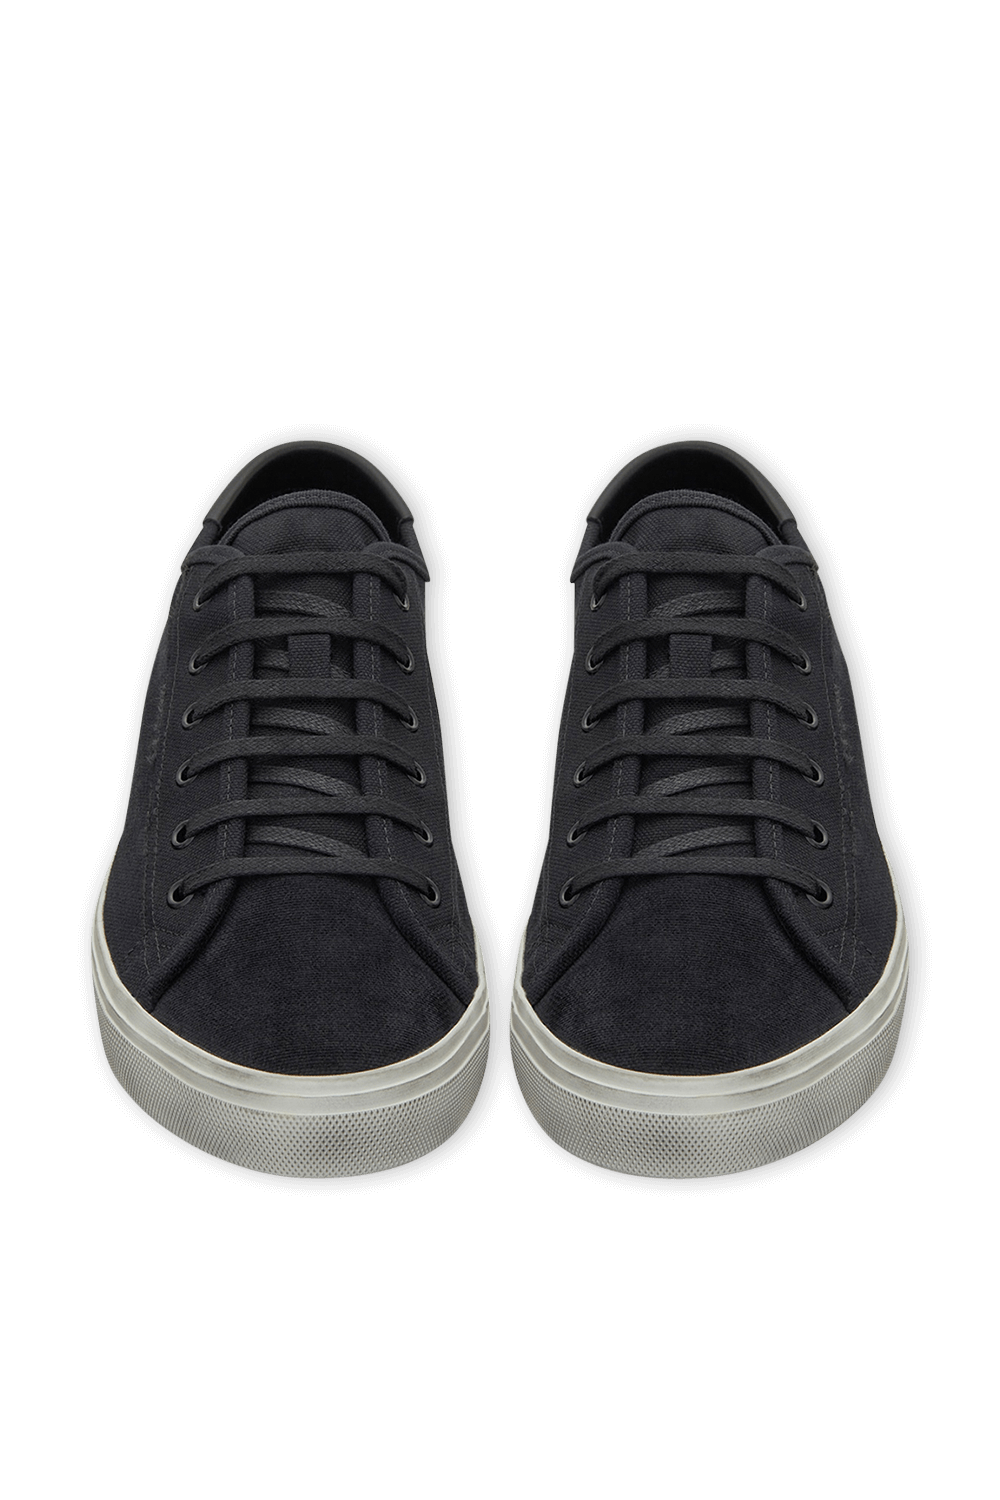 Malibu Sneakers in Black Canvas and Leather SAINT LAURENT